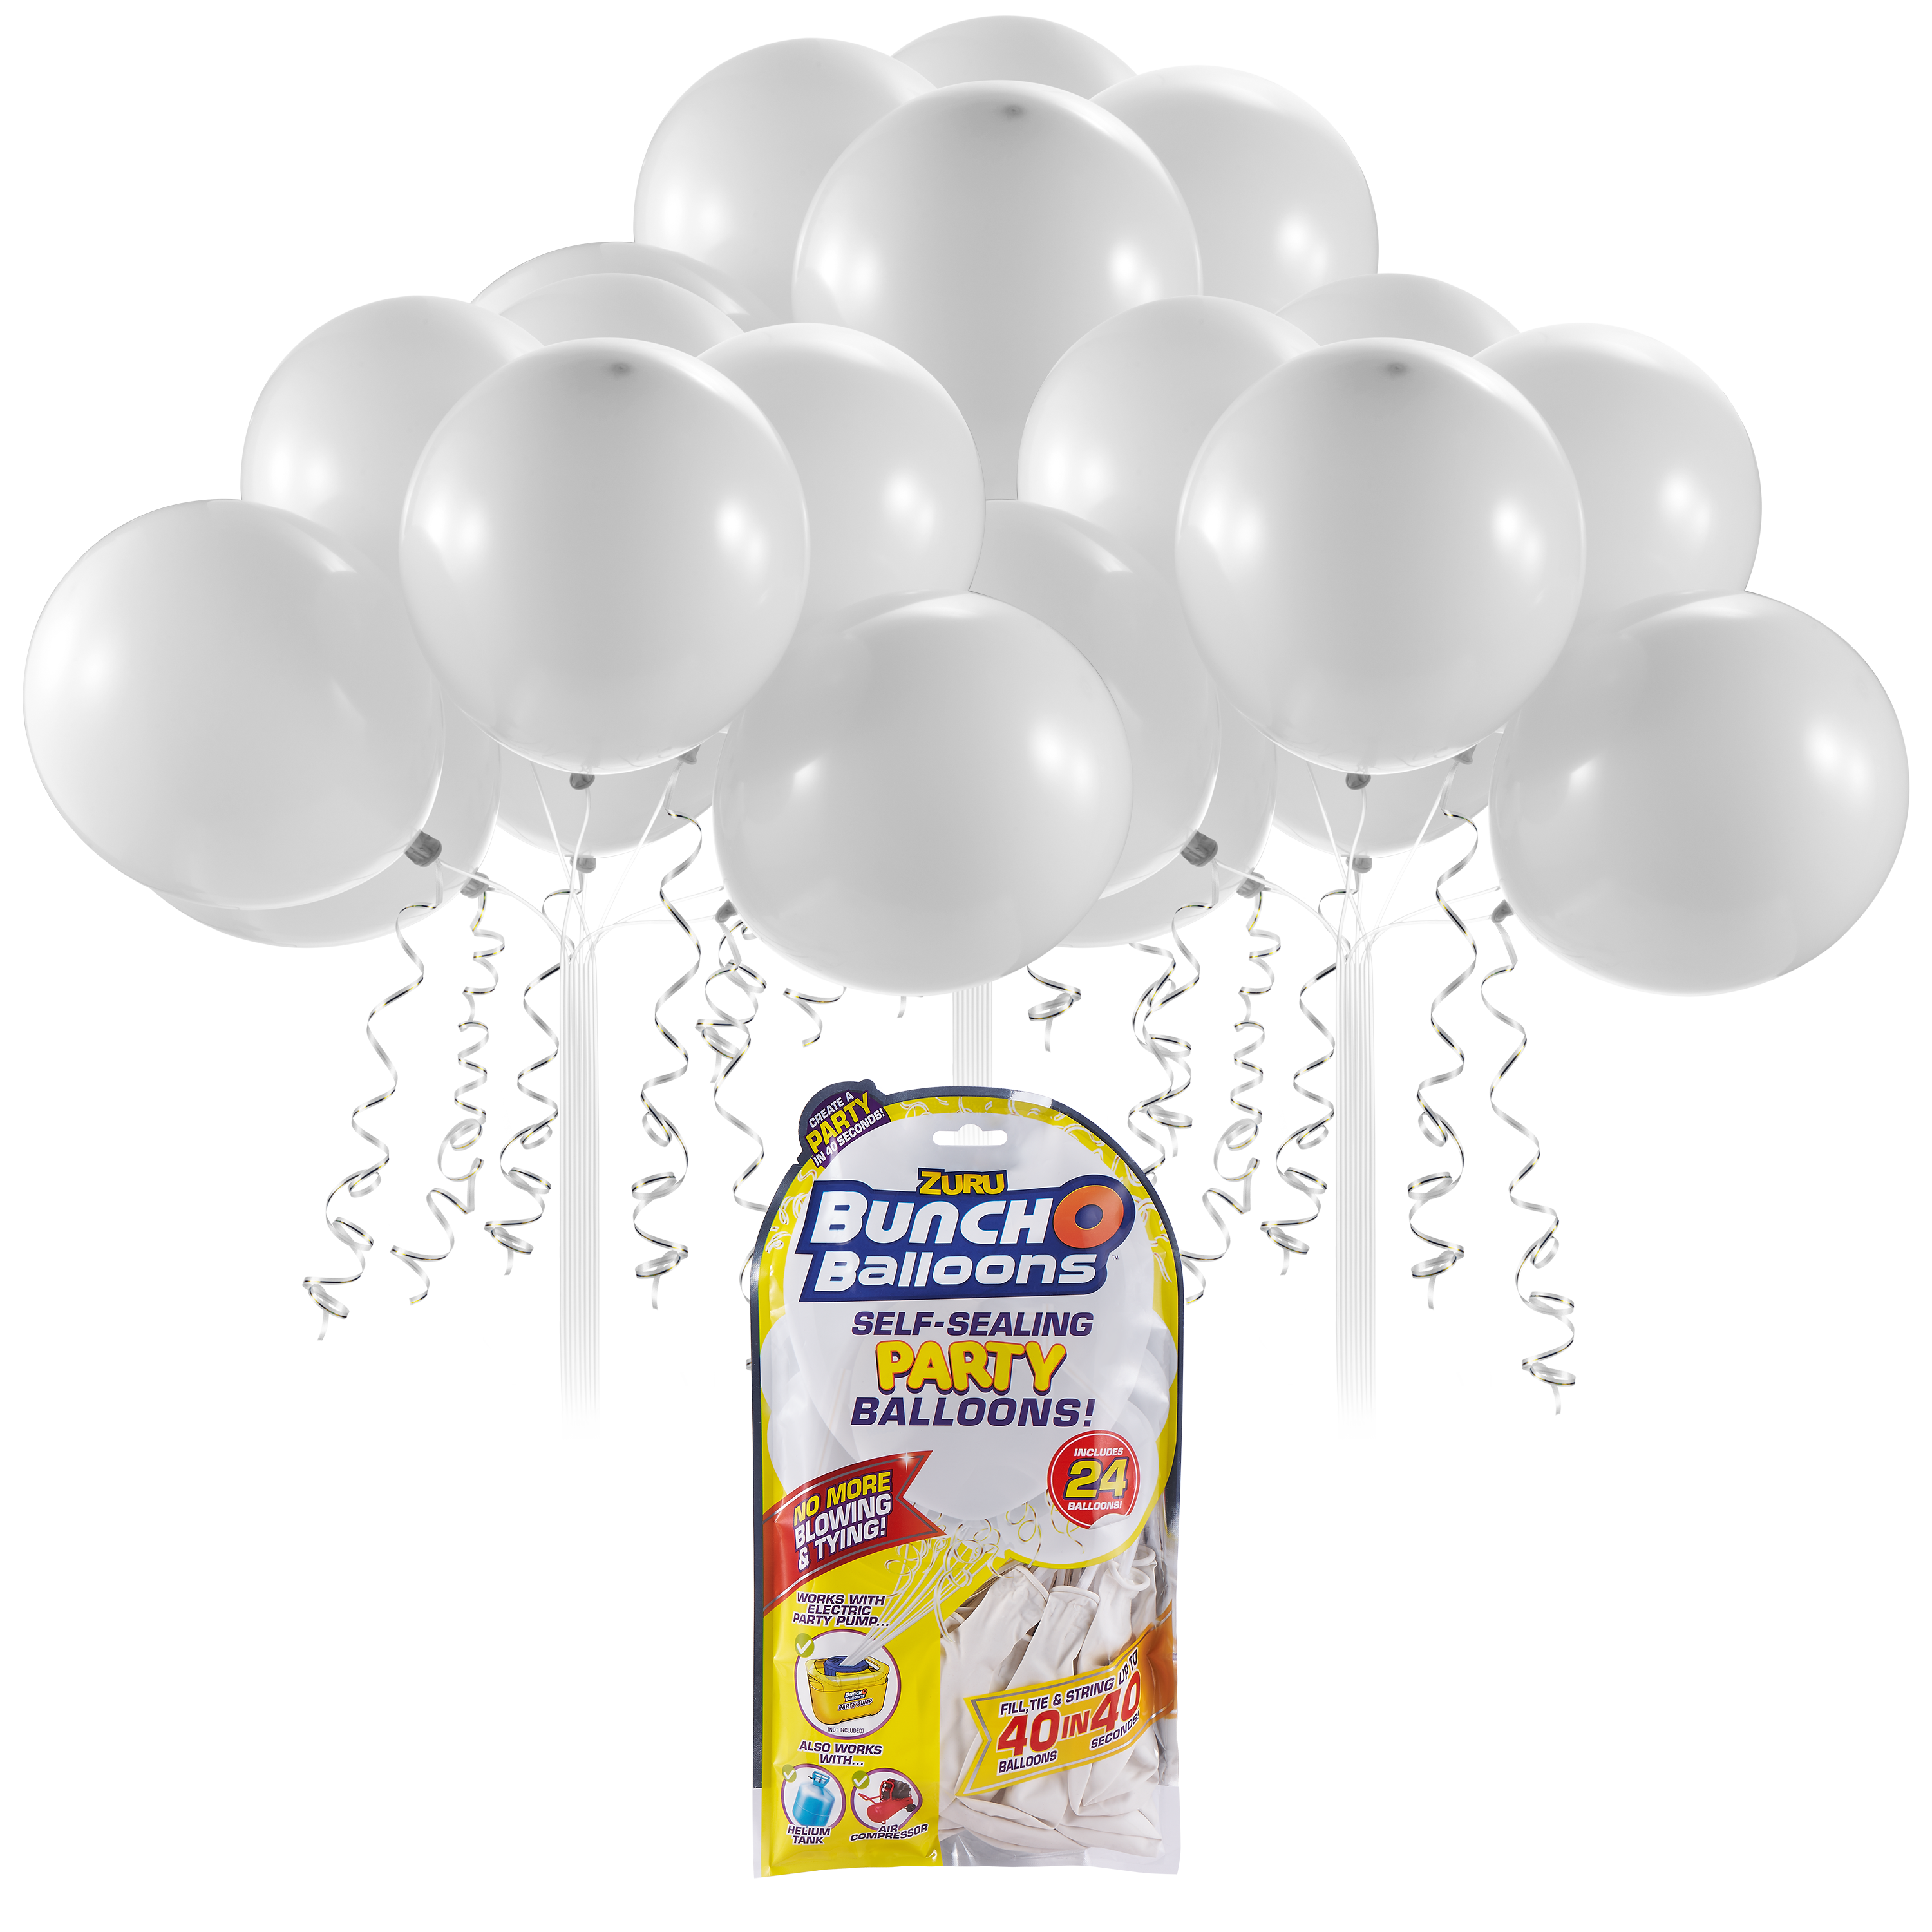 Bunch O Balloons Self-Sealing Latex Party Balloons, White, 11in, 24ct - image 1 of 10